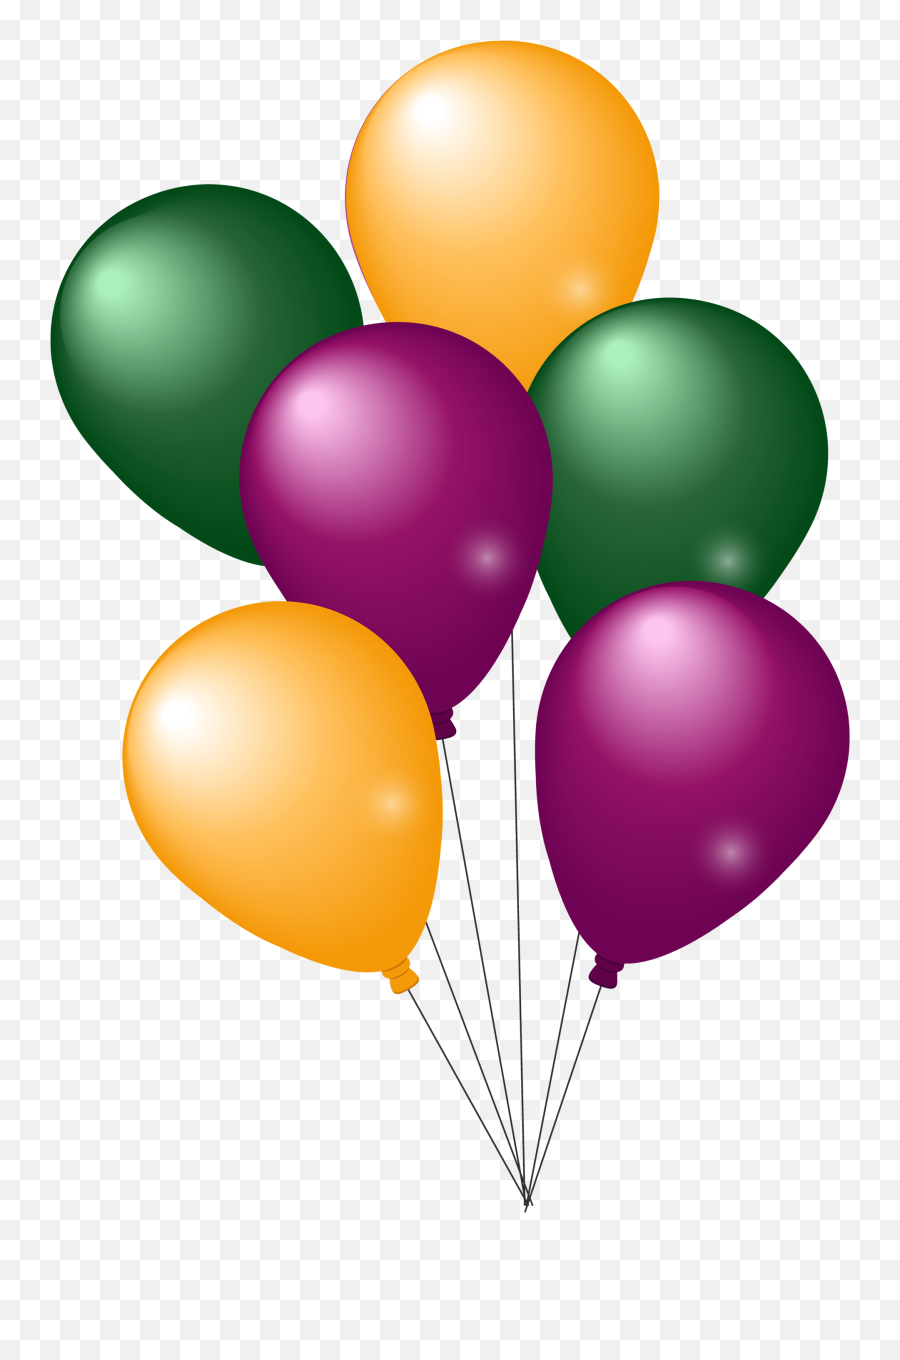 Colorful Party Balloons Png Image - Pngpix Png Format Baloon Png,Balloons Png